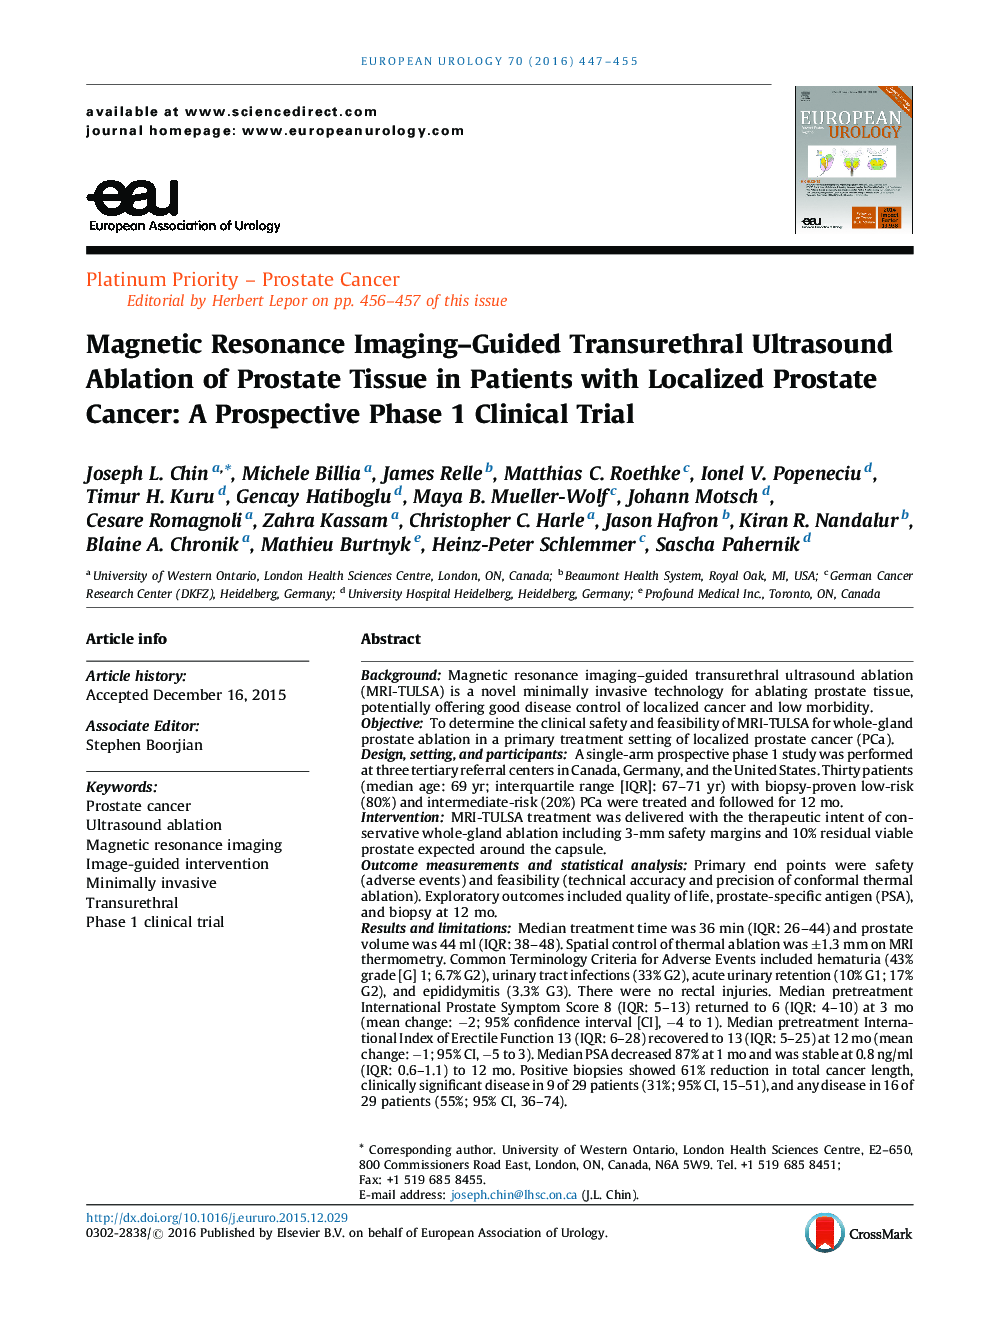 Magnetic Resonance Imaging-Guided Transurethral Ultrasound Ablation of Prostate Tissue in Patients with Localized Prostate Cancer: A Prospective Phase 1 Clinical Trial